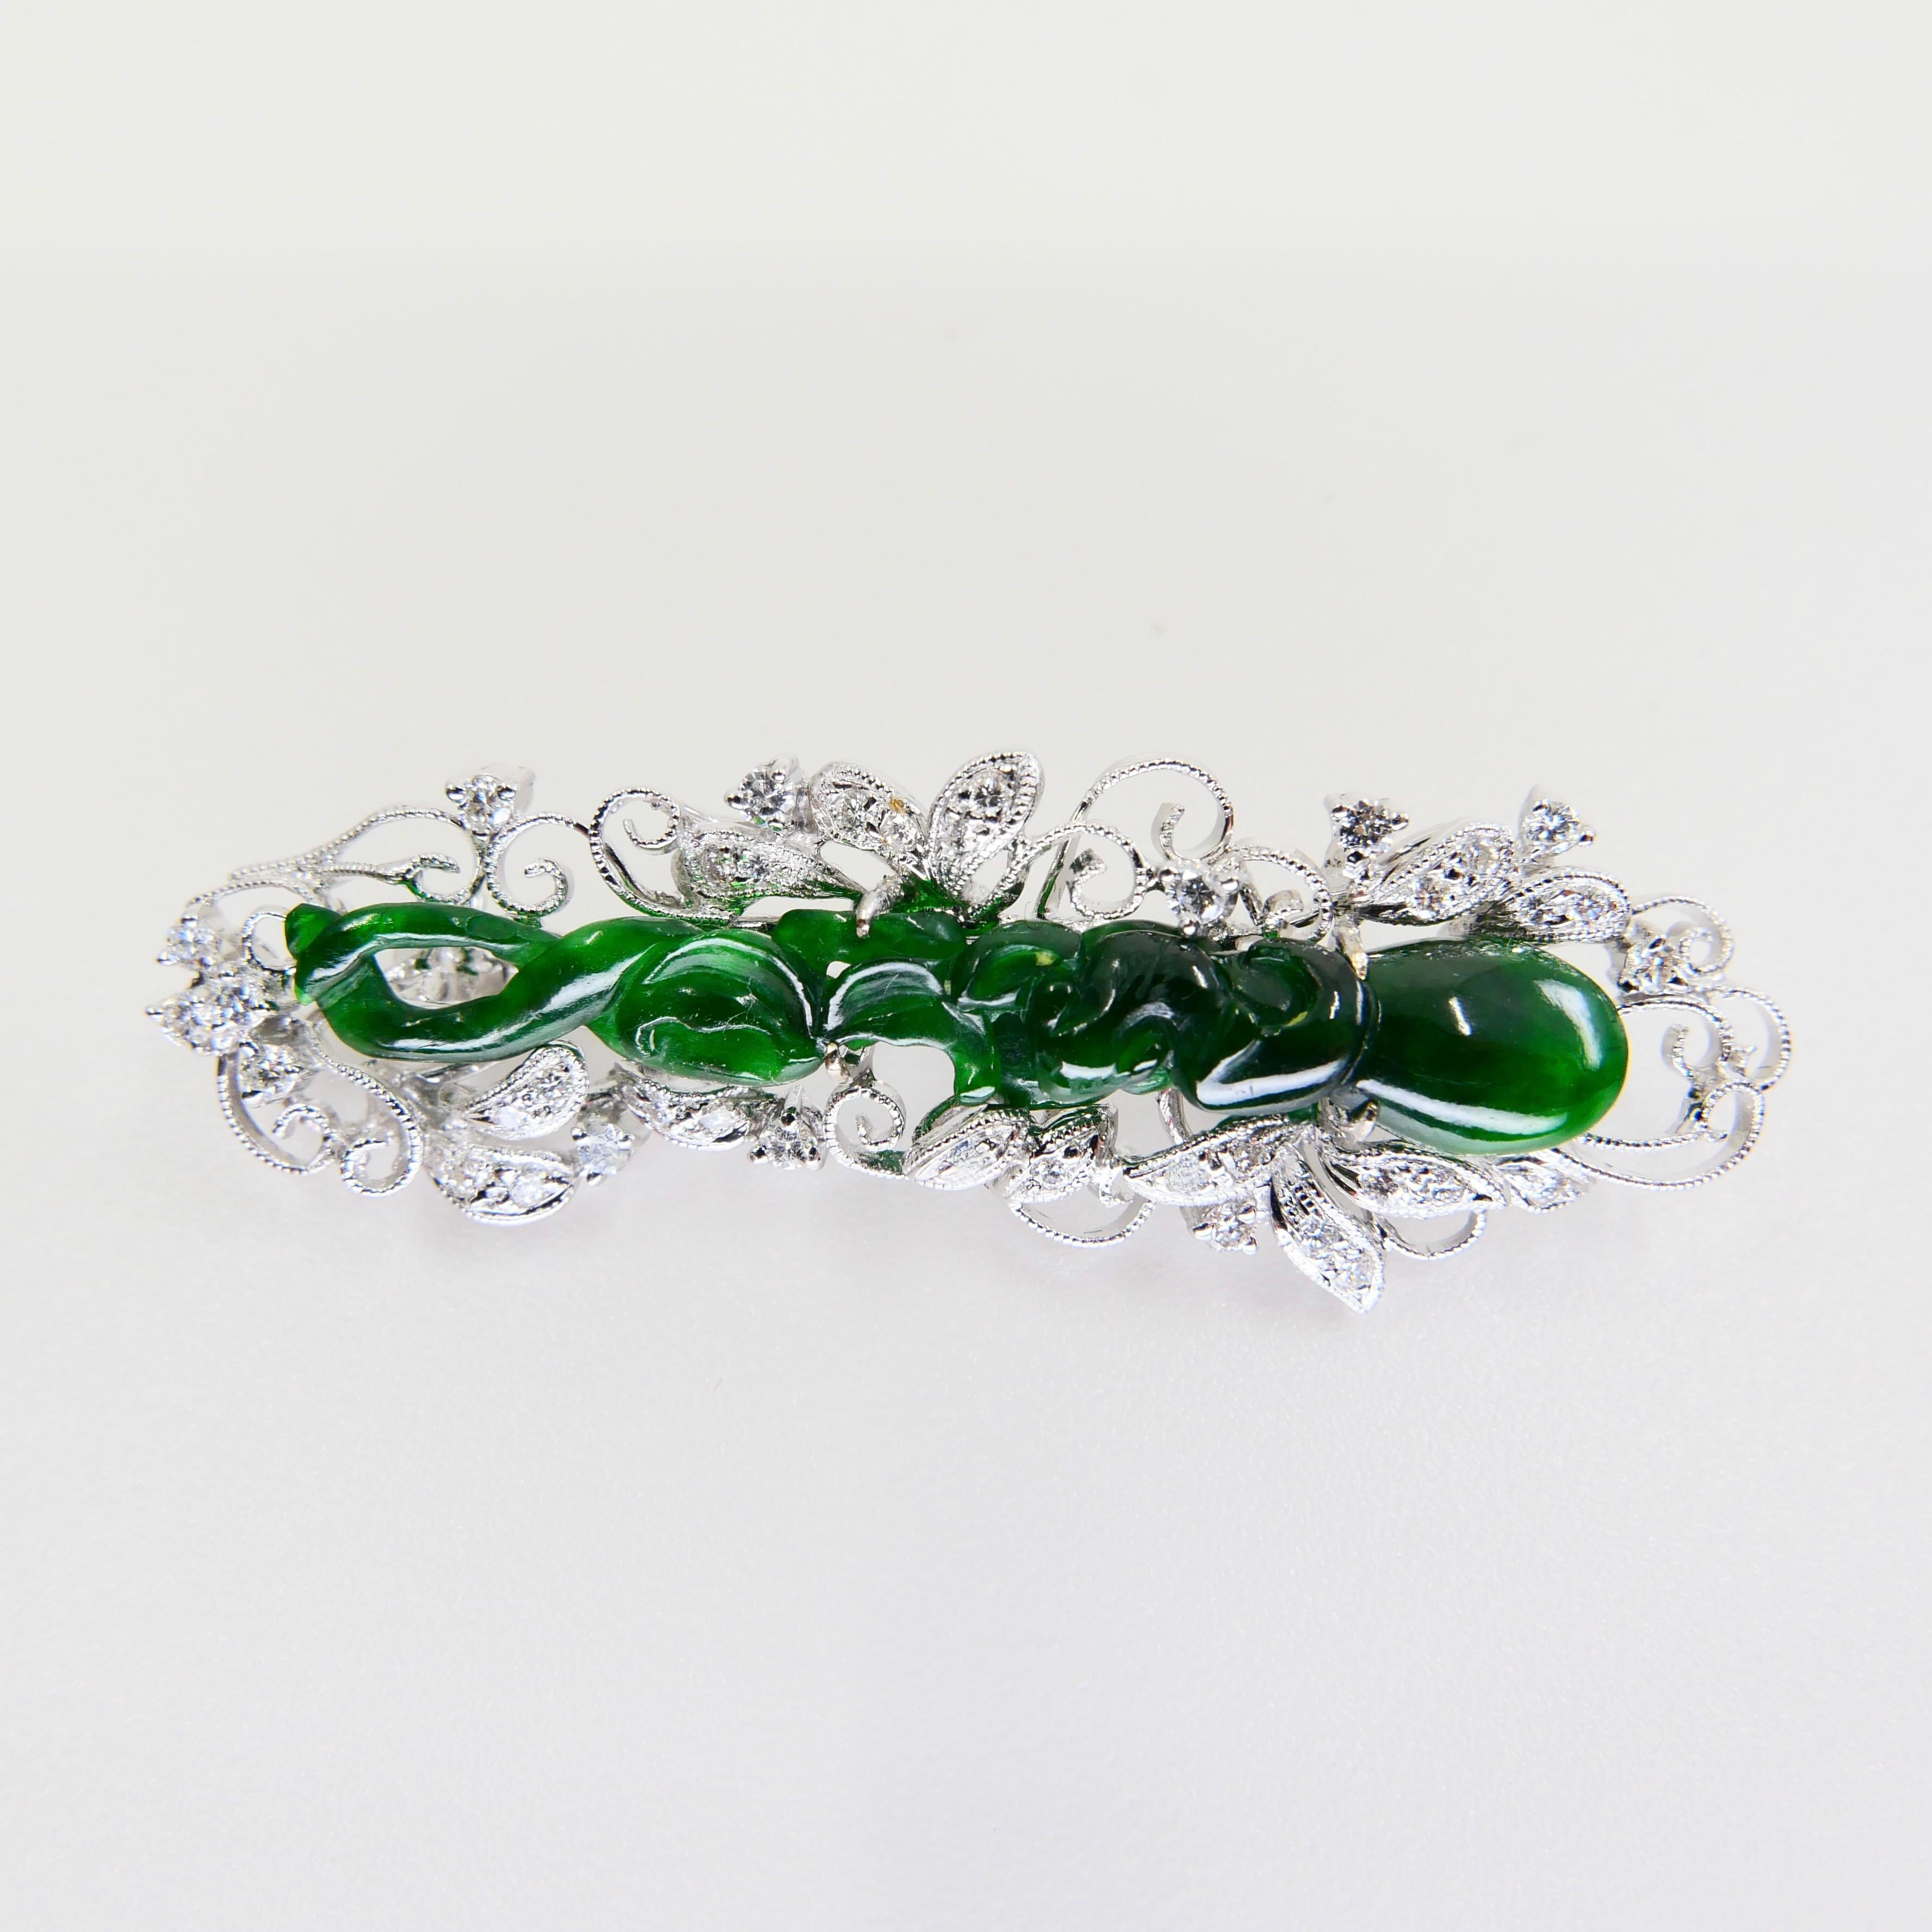 Certified Intense Green Carved Jade & Diamond Brooch, Close to Imperial Green For Sale 5